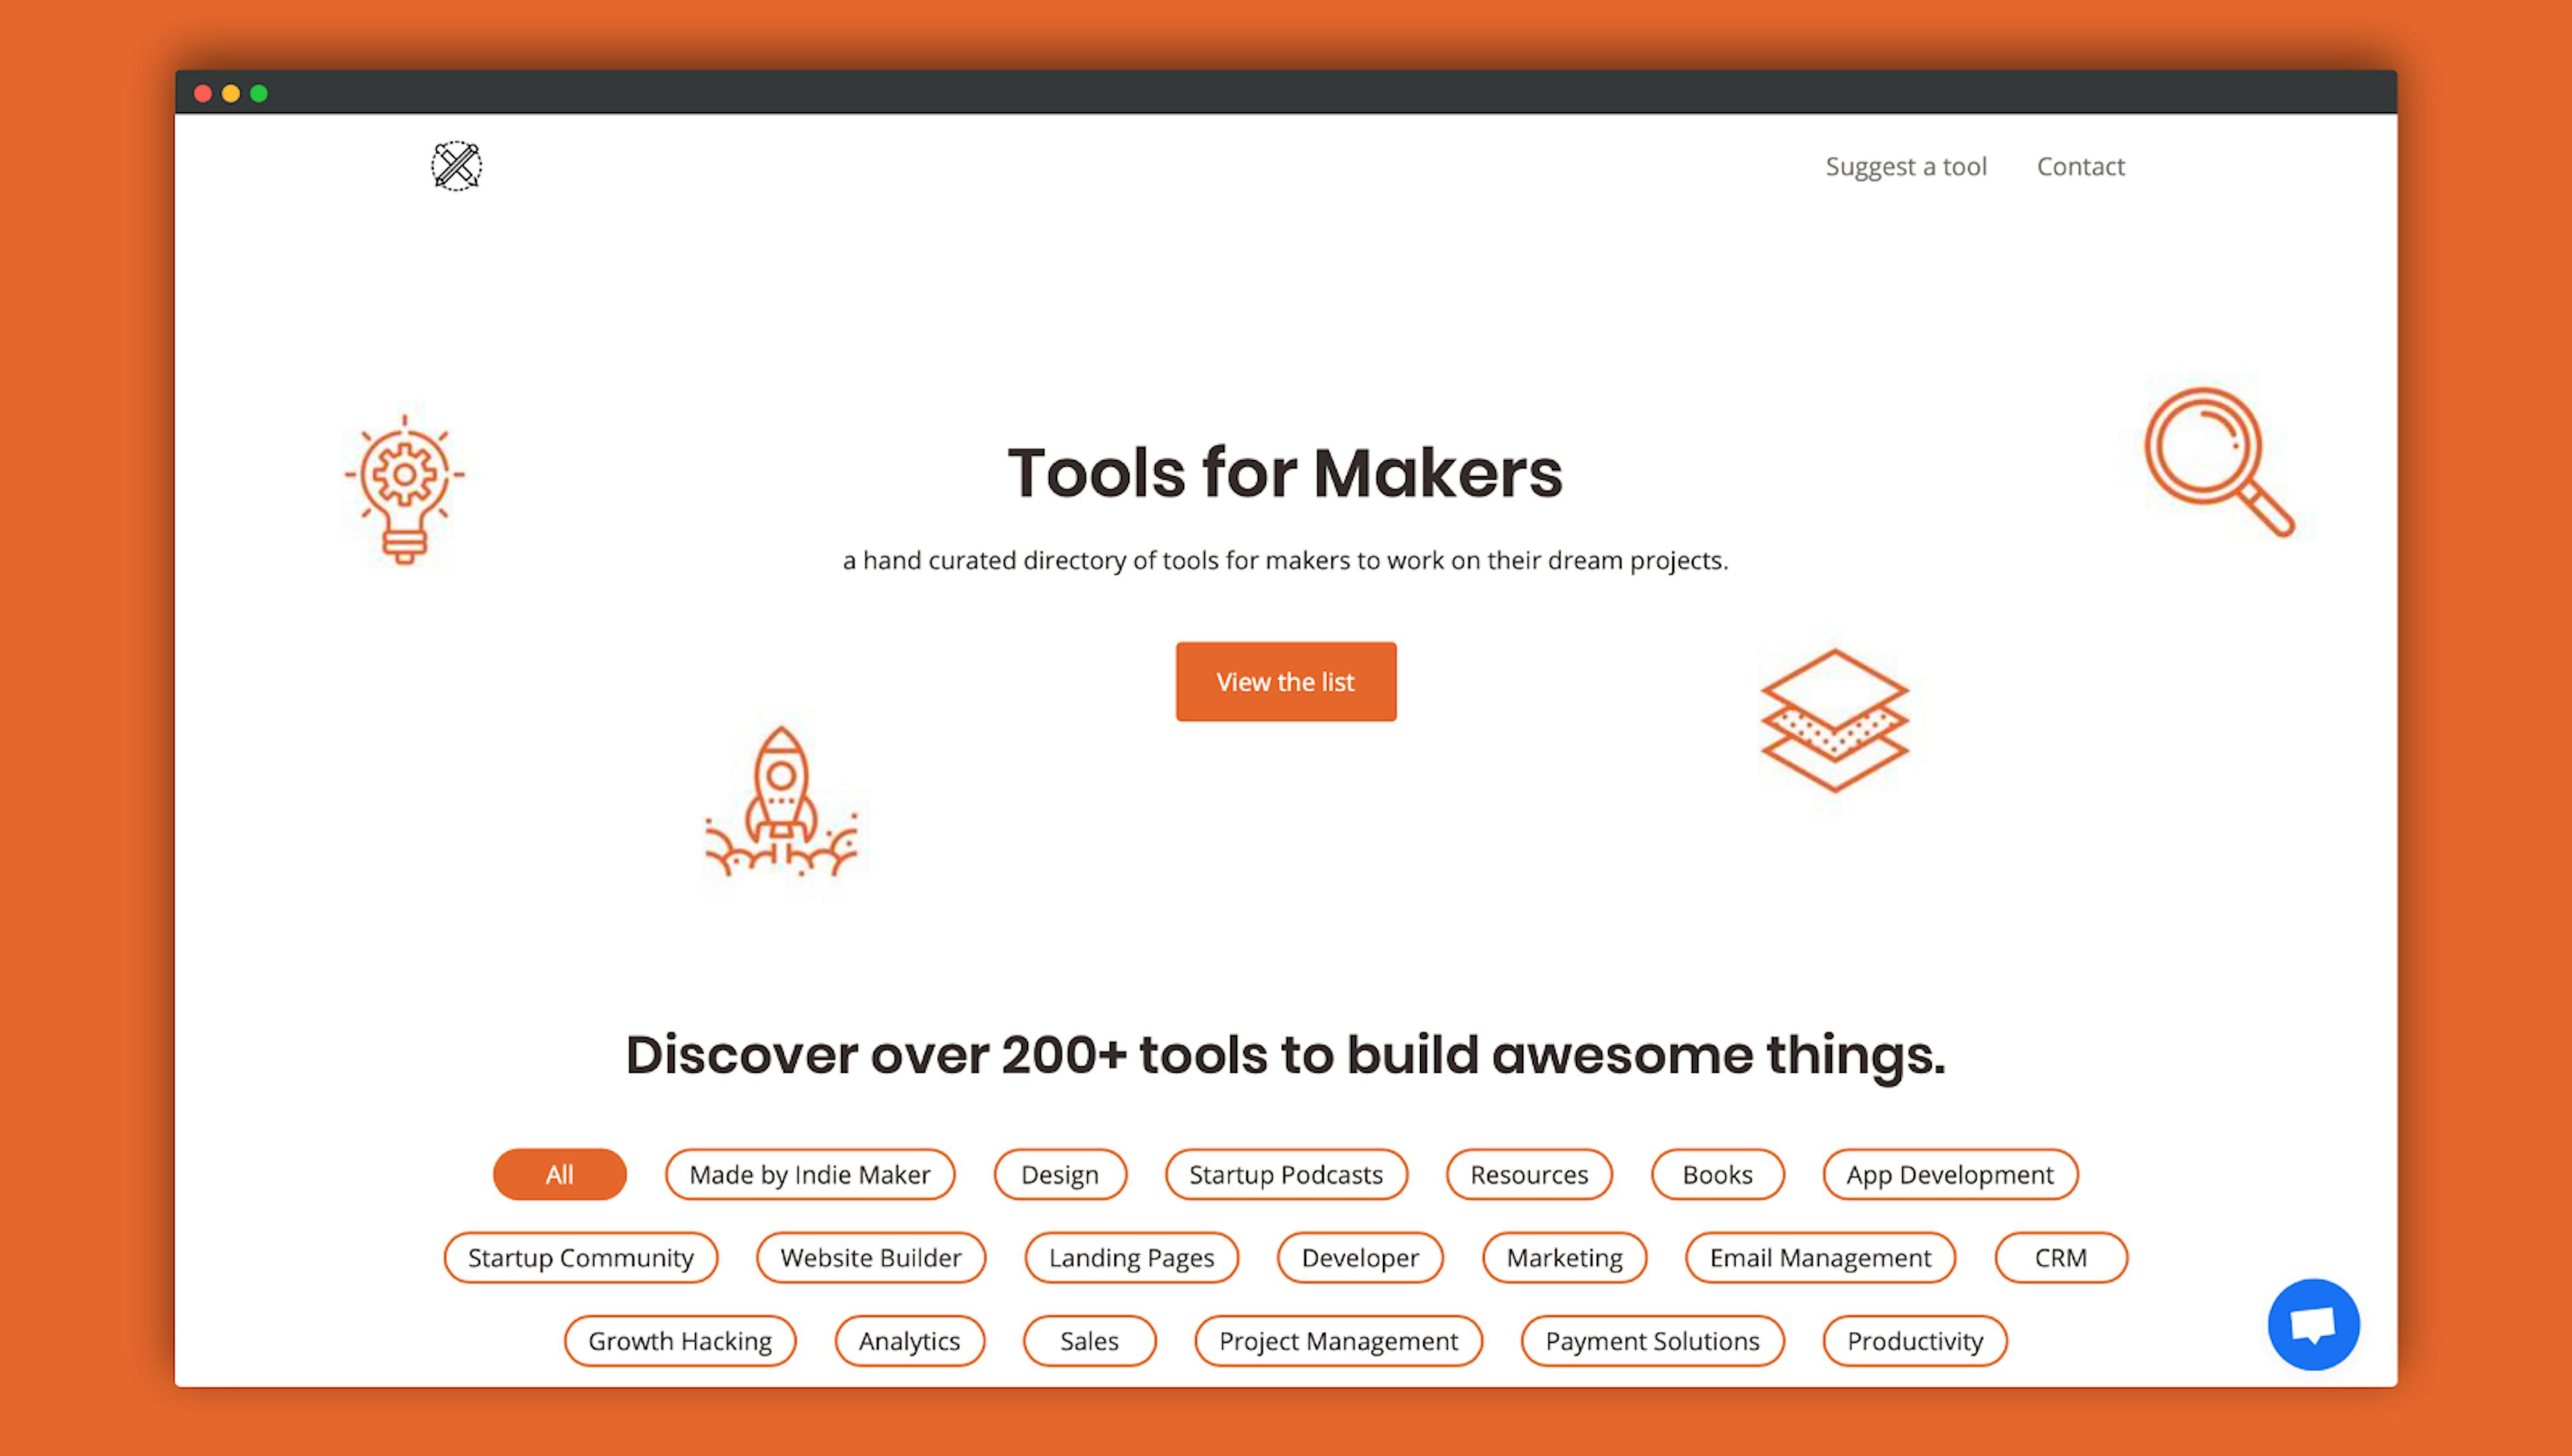 /tools-for-makers-a-hand-curated-directory-of-tools-for-indie-makers-8f50d7fcb8 feature image